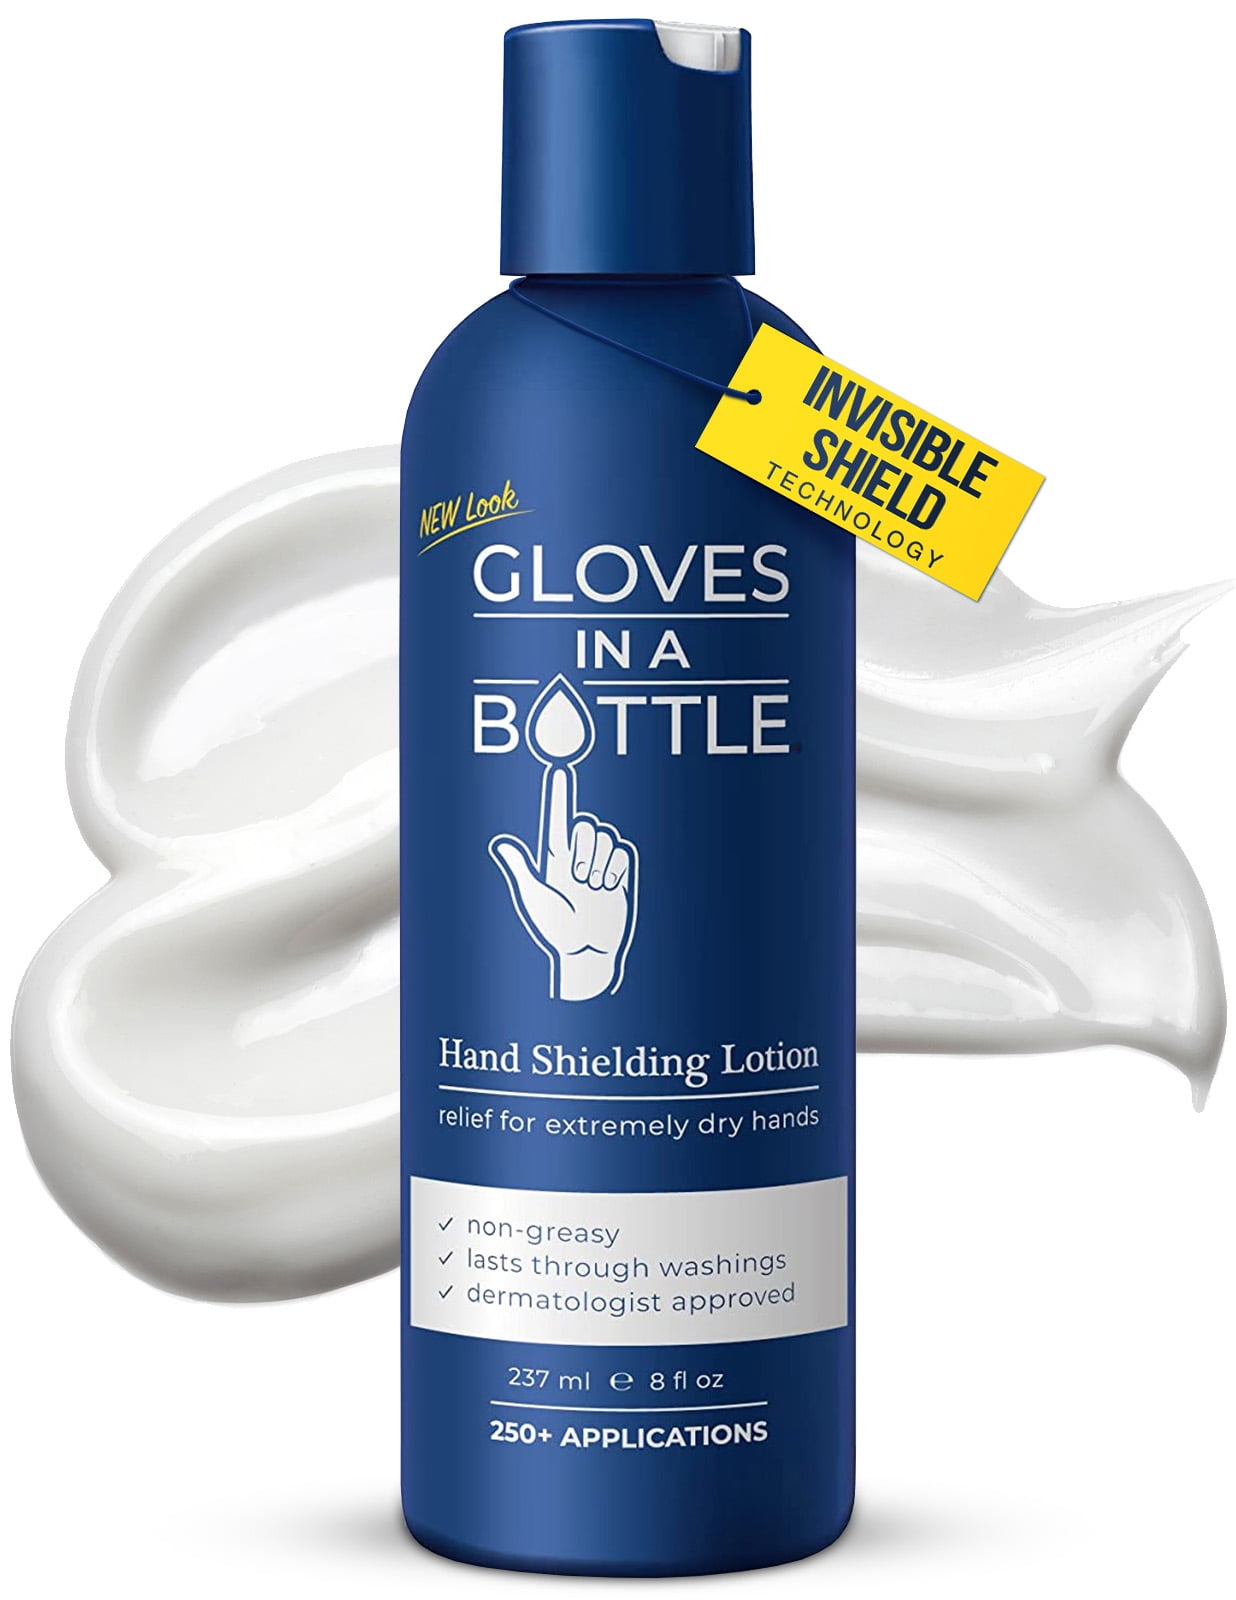 Gloves In A Bottle – Travelers Friend Hand Repair Set, Travel Hand Cream for Dry Hands, Protects & Restores Dry Skin - 8oz (240mL) - Walmart.com